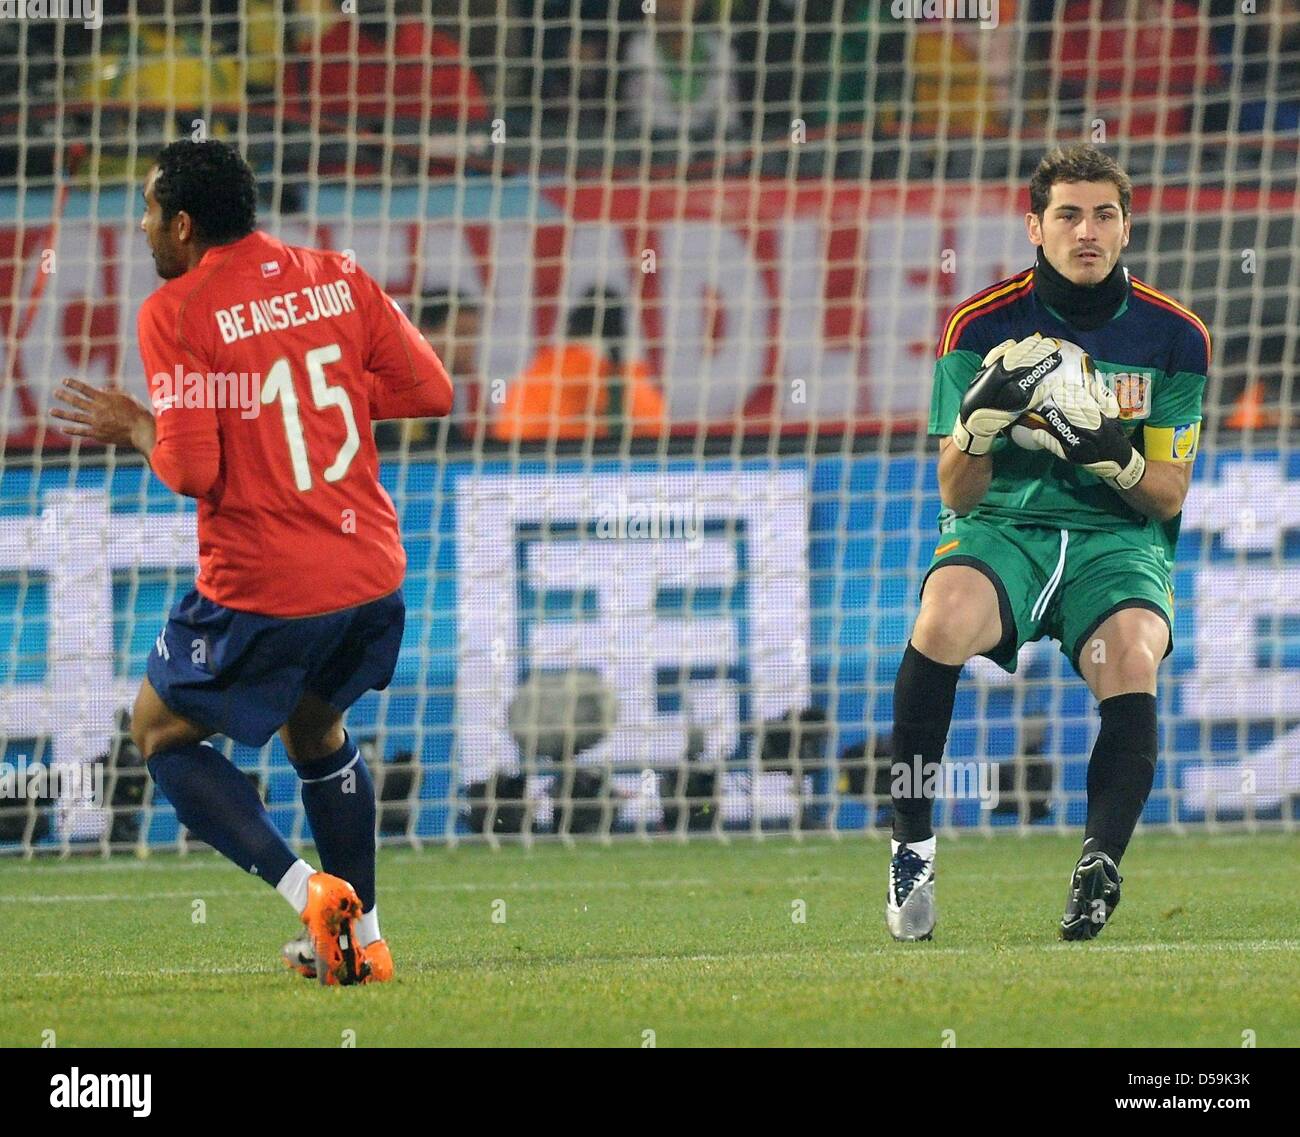 Spain's goalkeeper Iker (R) catches the ball in front of Chile's Jean Beausejour during the 2010 FIFA World Cup group H match between Chile and Spain at Loftus Versfeld Stadium in Pretoria, South Africa 25 June 2010. Photo: Marcus Brandt dpa - Please refer to http://dpaq.de/FIFA-WM2010-TC Stock Photo